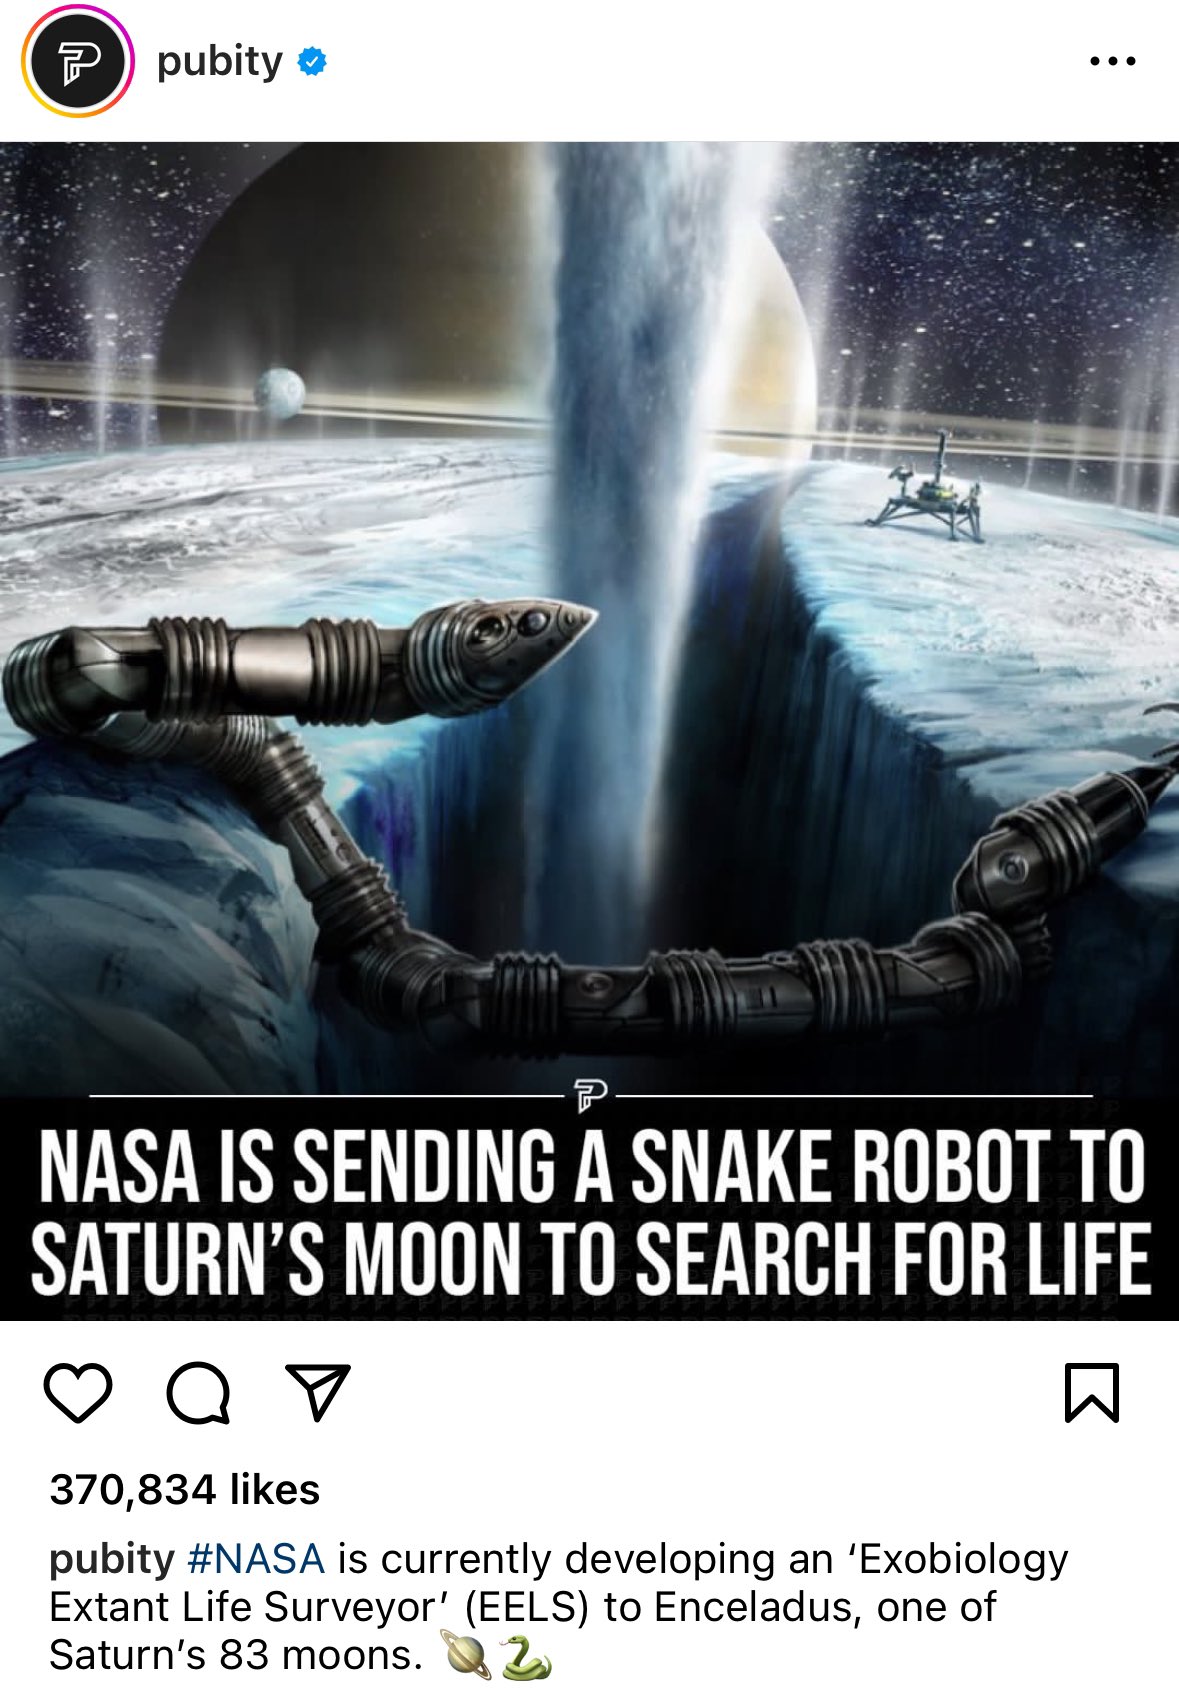 Snake robot may search for life on Saturn's moon